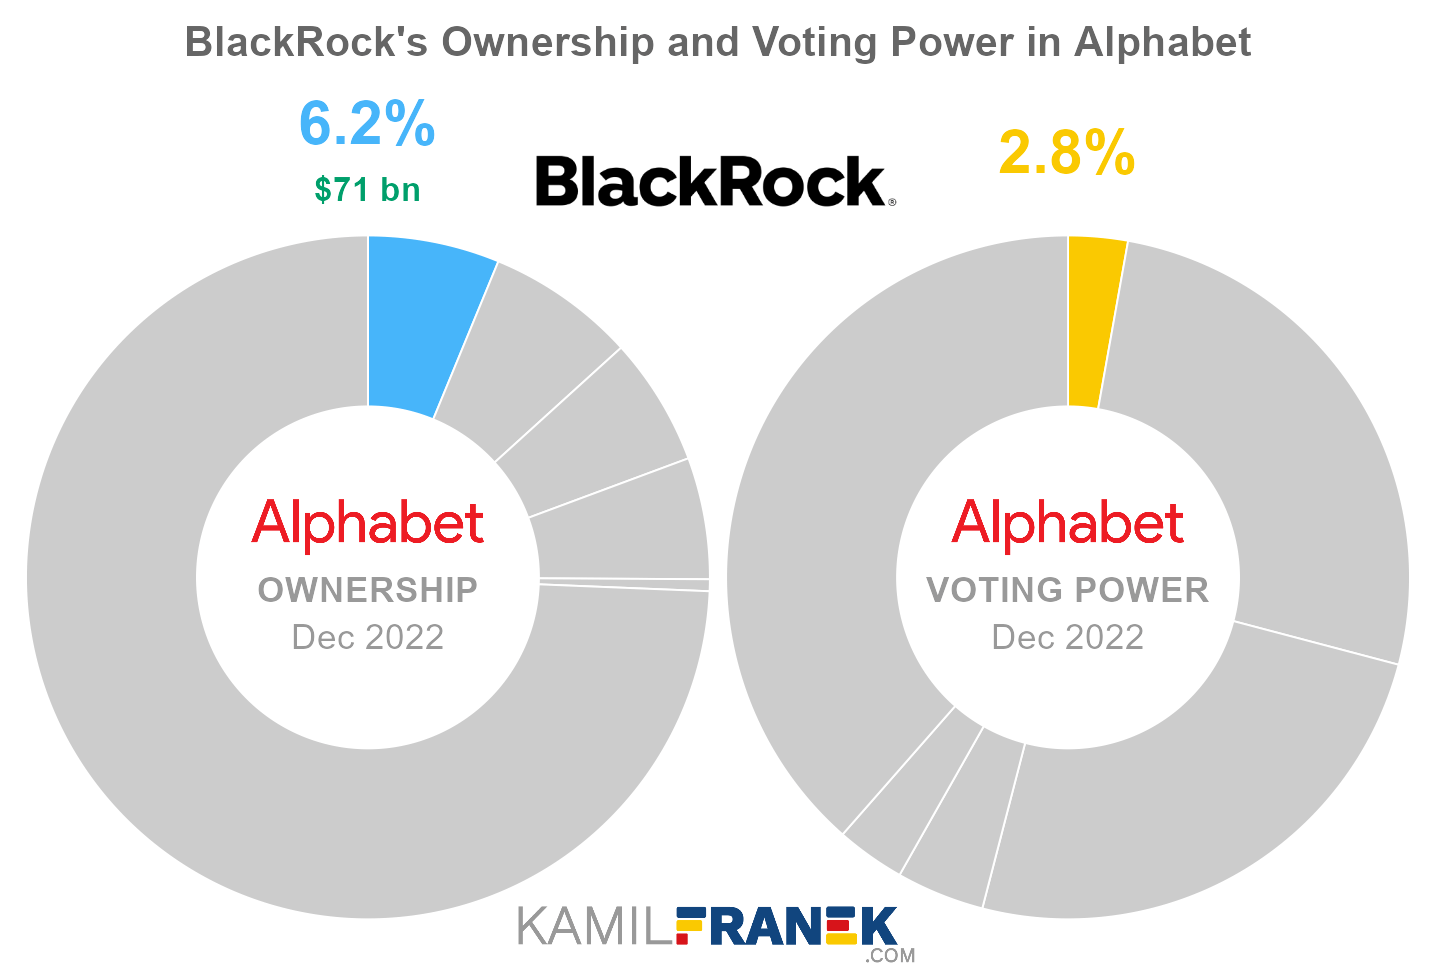 BlackRock's share ownership and voting power in Alphabet (chart)